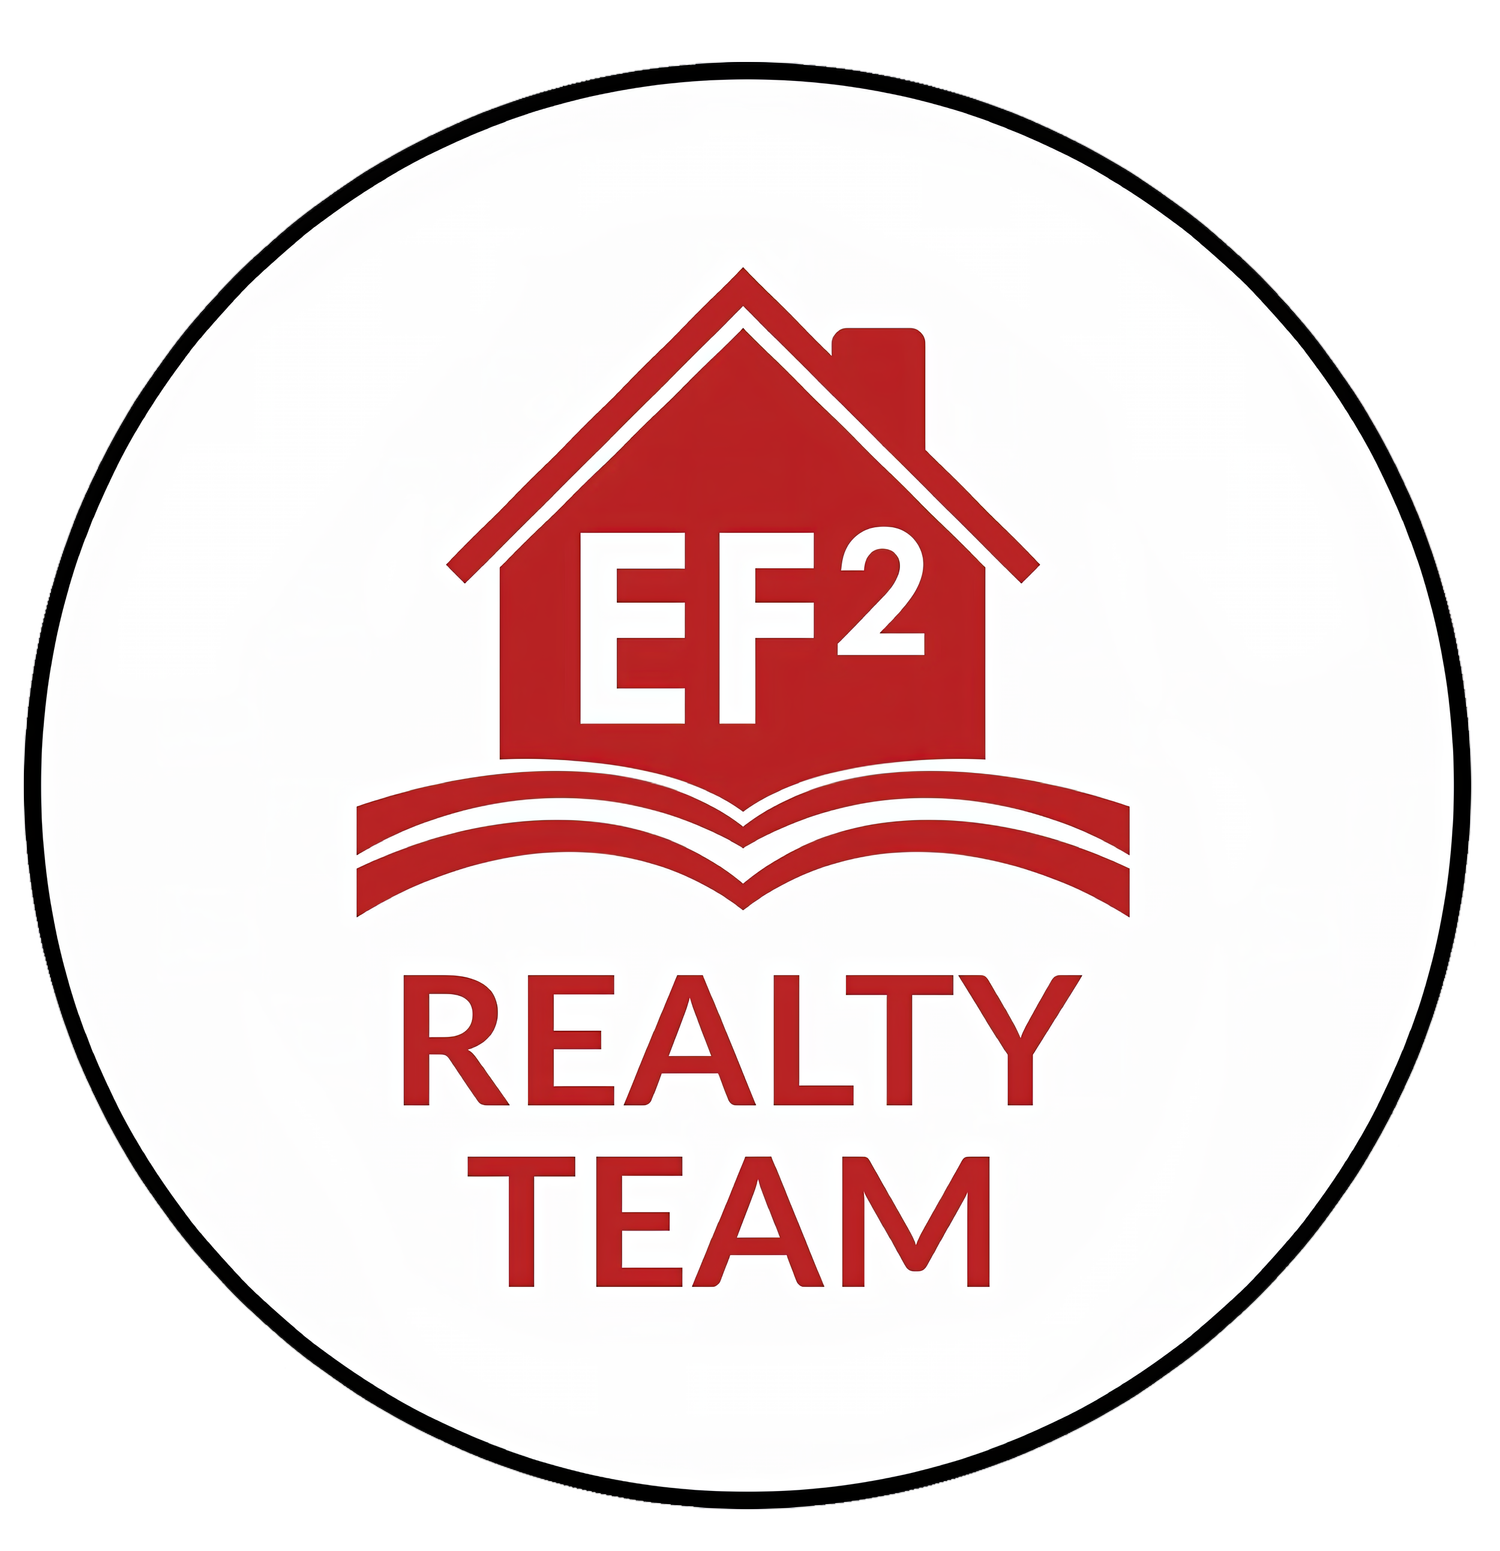 Education First Fund Realty Team